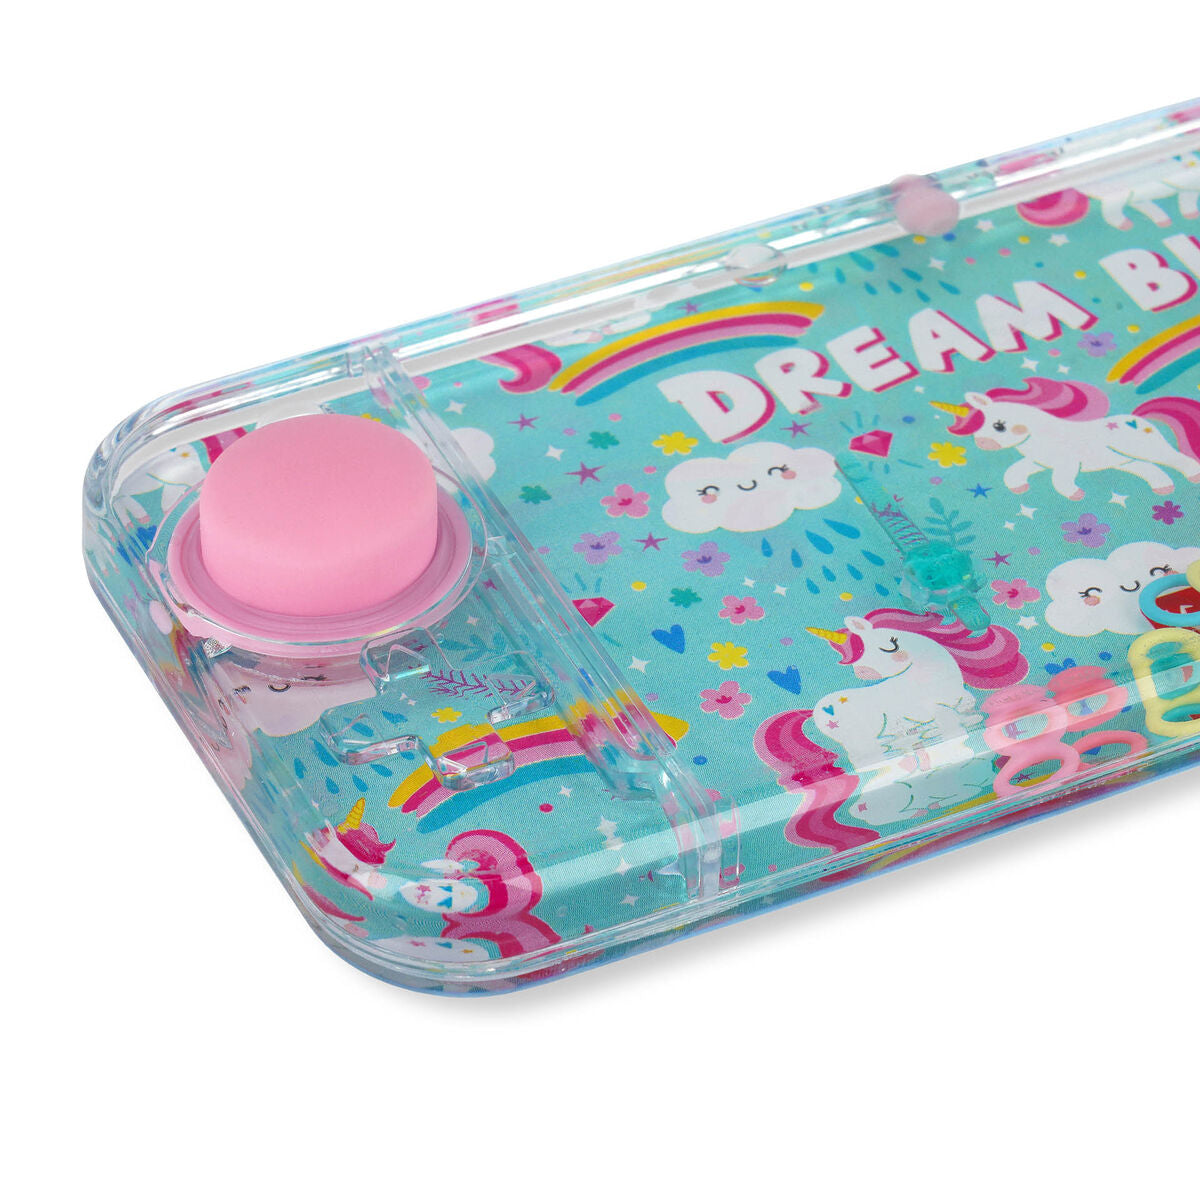 Summer Accessories - Legami Mini Water Game - Unicorn by Weirs of Baggot Street